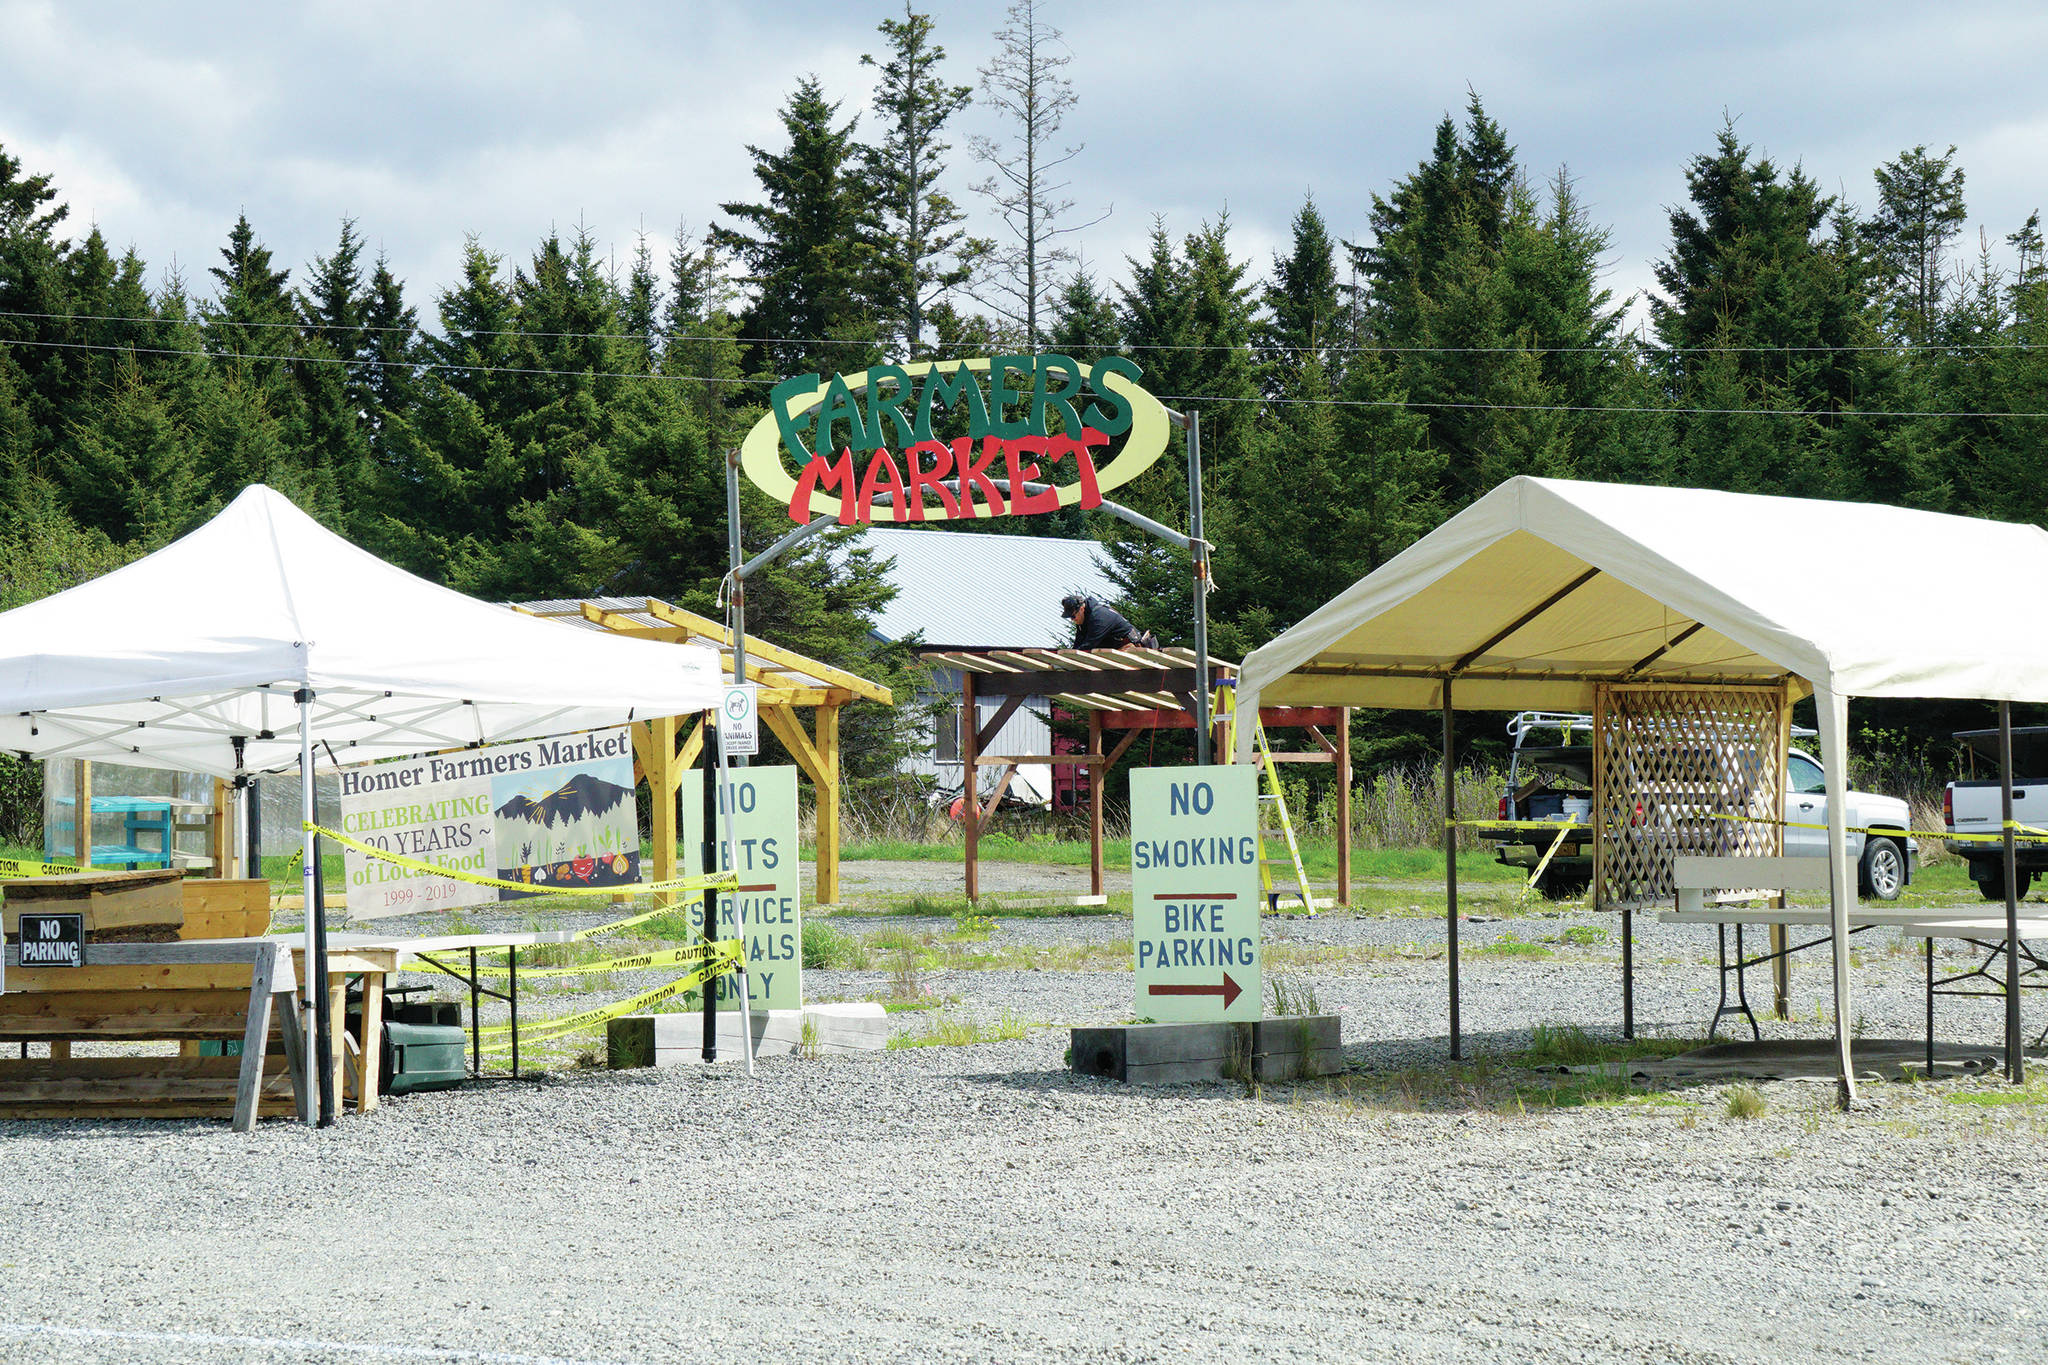 Booths at the Homer Farmers Market stand ready on Monday, May 25, 2020, at the Homer Farmers Market in Homer, Alaska. In the background, Dave Pleznac works on the roof of the Snowshoe Hollow Farm booth while his wife, Christina Castellanos, helps. The market opens on Saturday, May 30, on Ocean Drive in Homer, Alaska. (Photo by Michael Armstrong/Homer News0